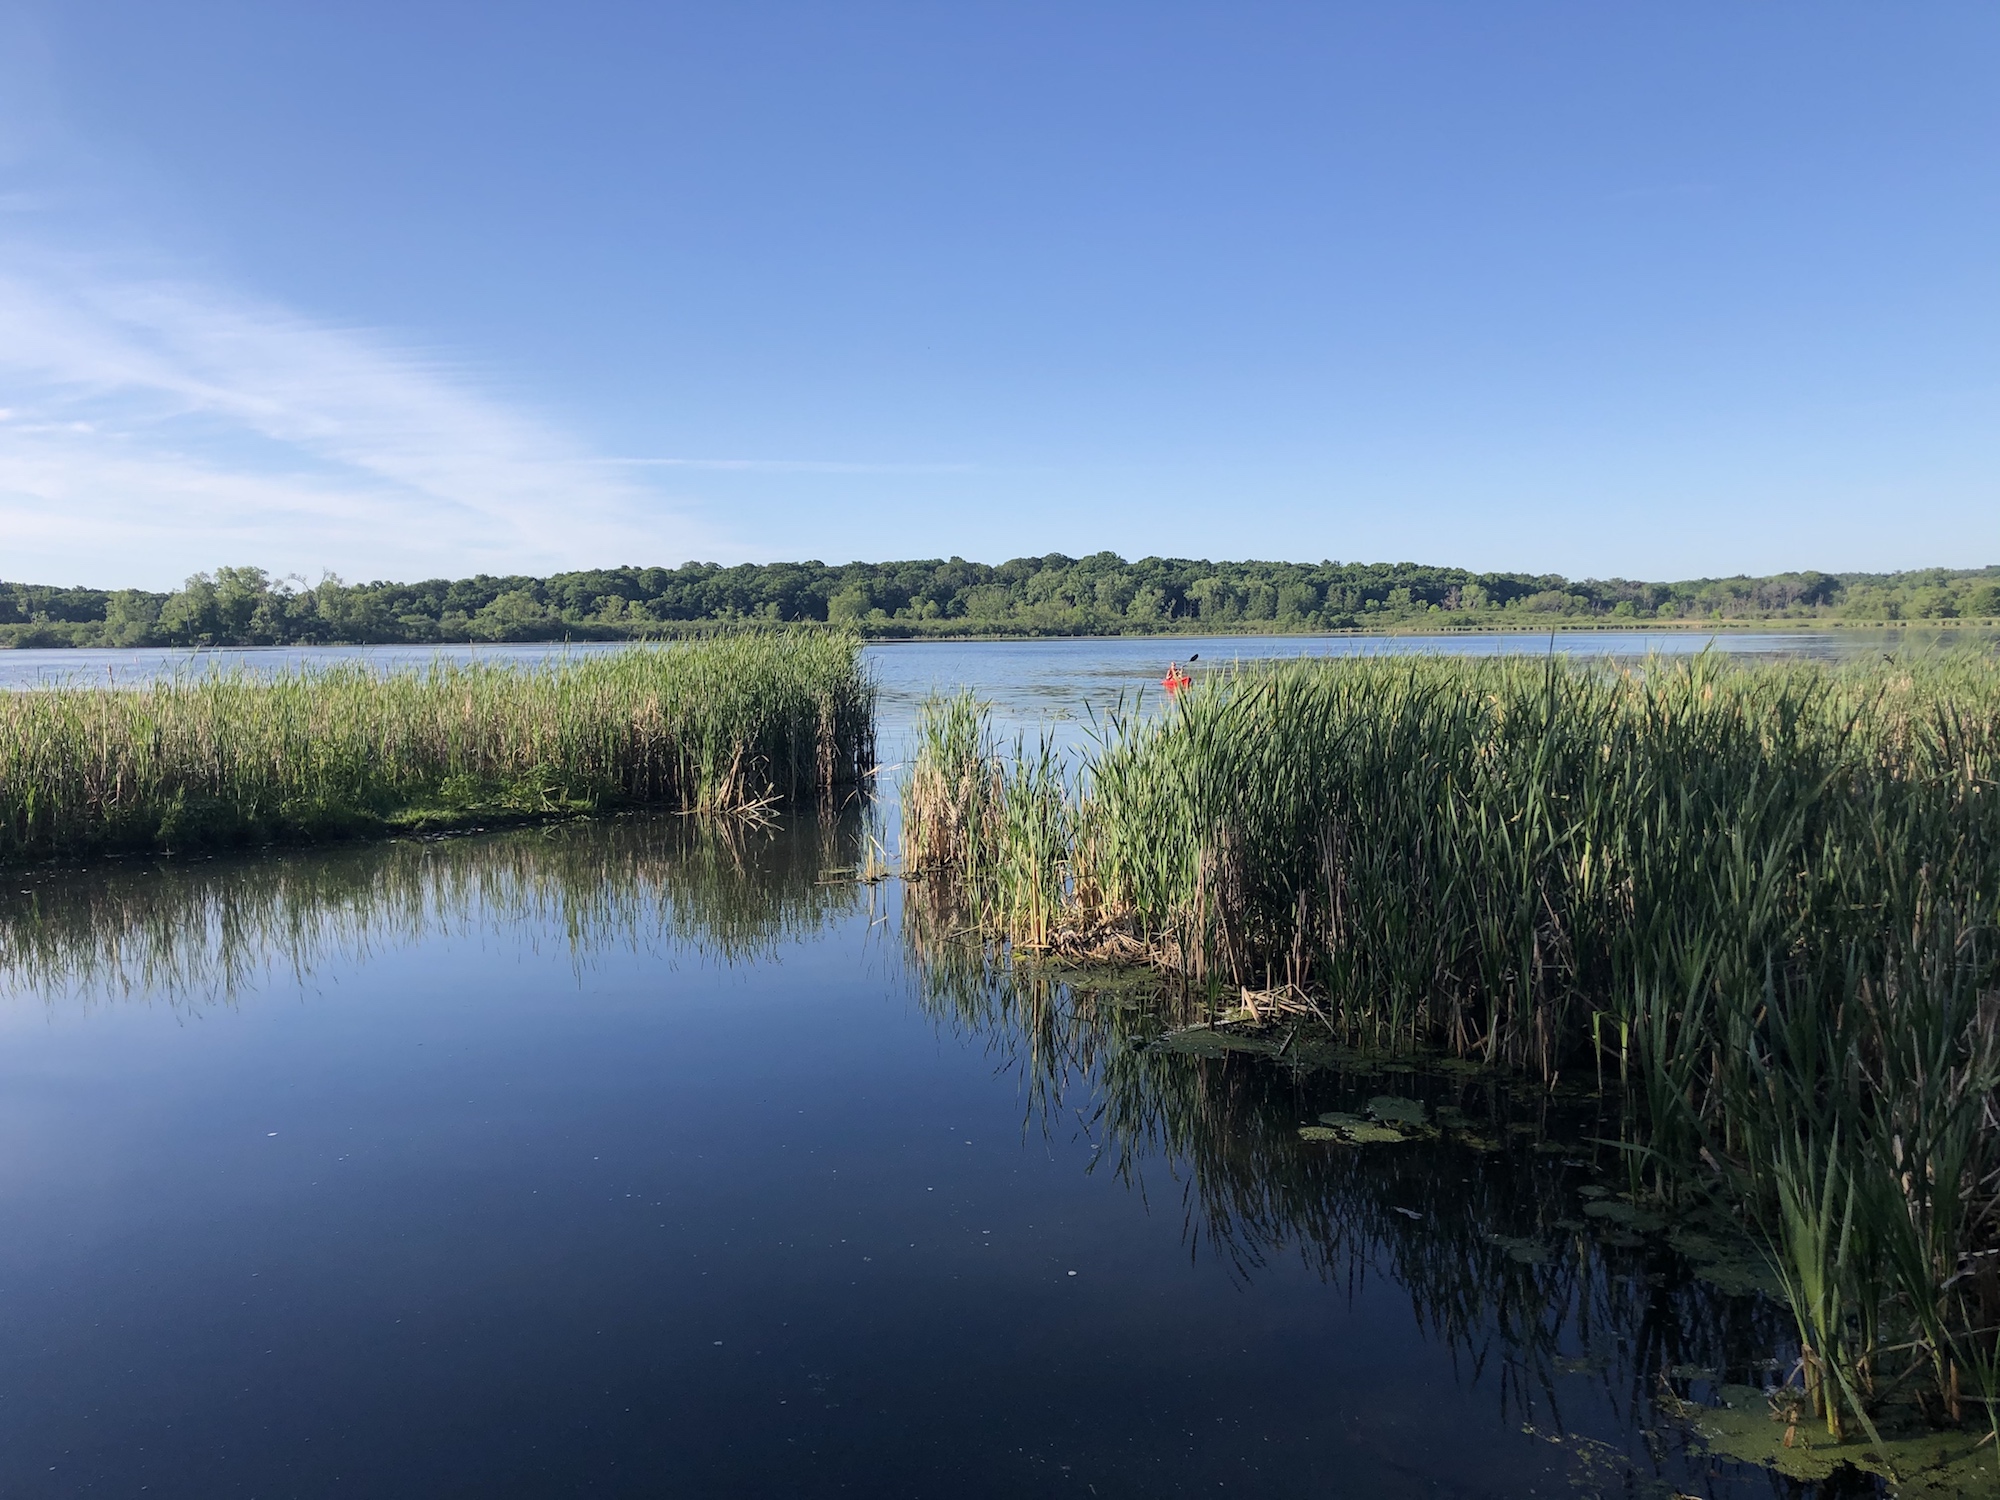 Cattails on Lake Wingra in Madison, Wisconsin on June 15, 2020.